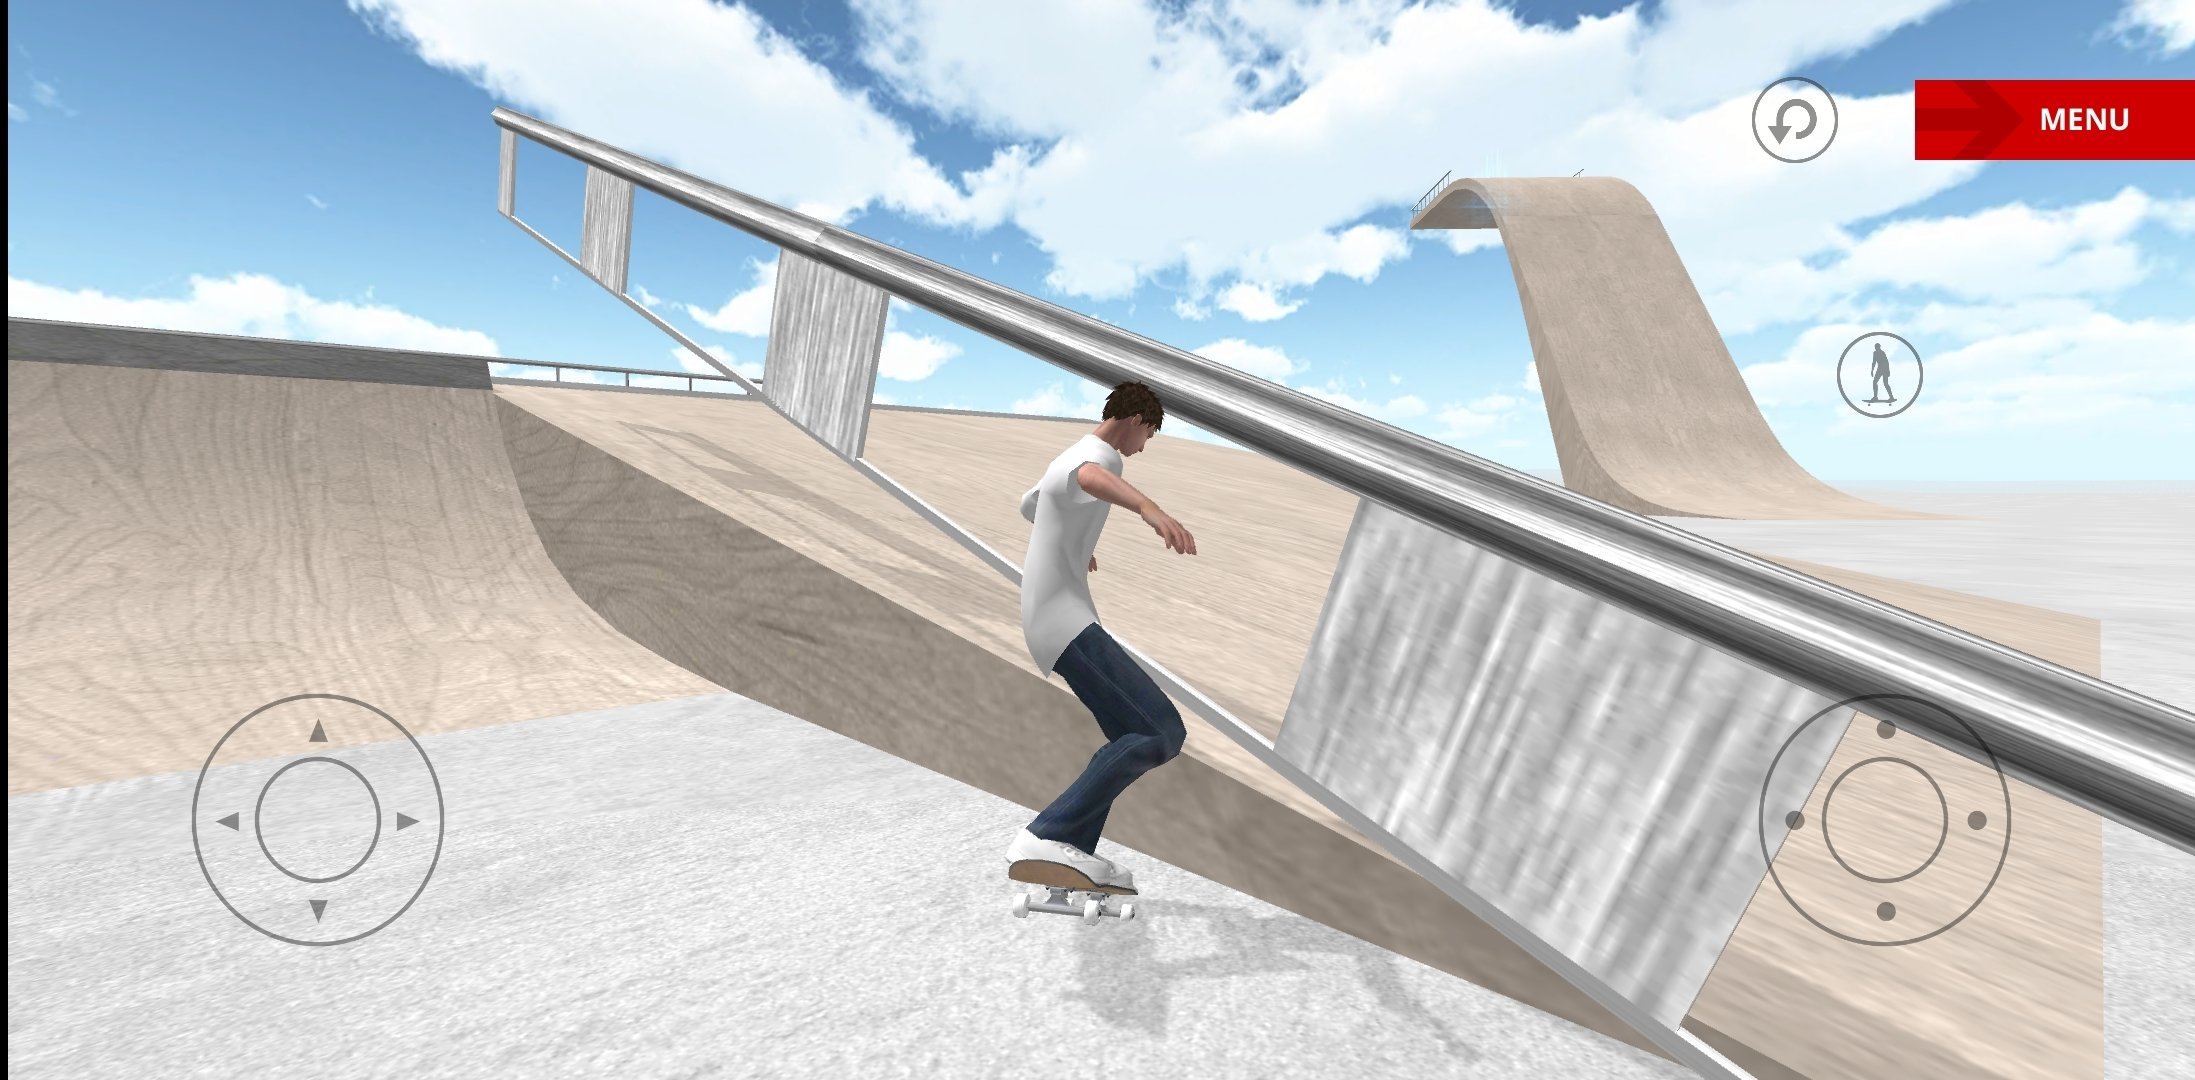 Skate Space - Download & Play for Free Here